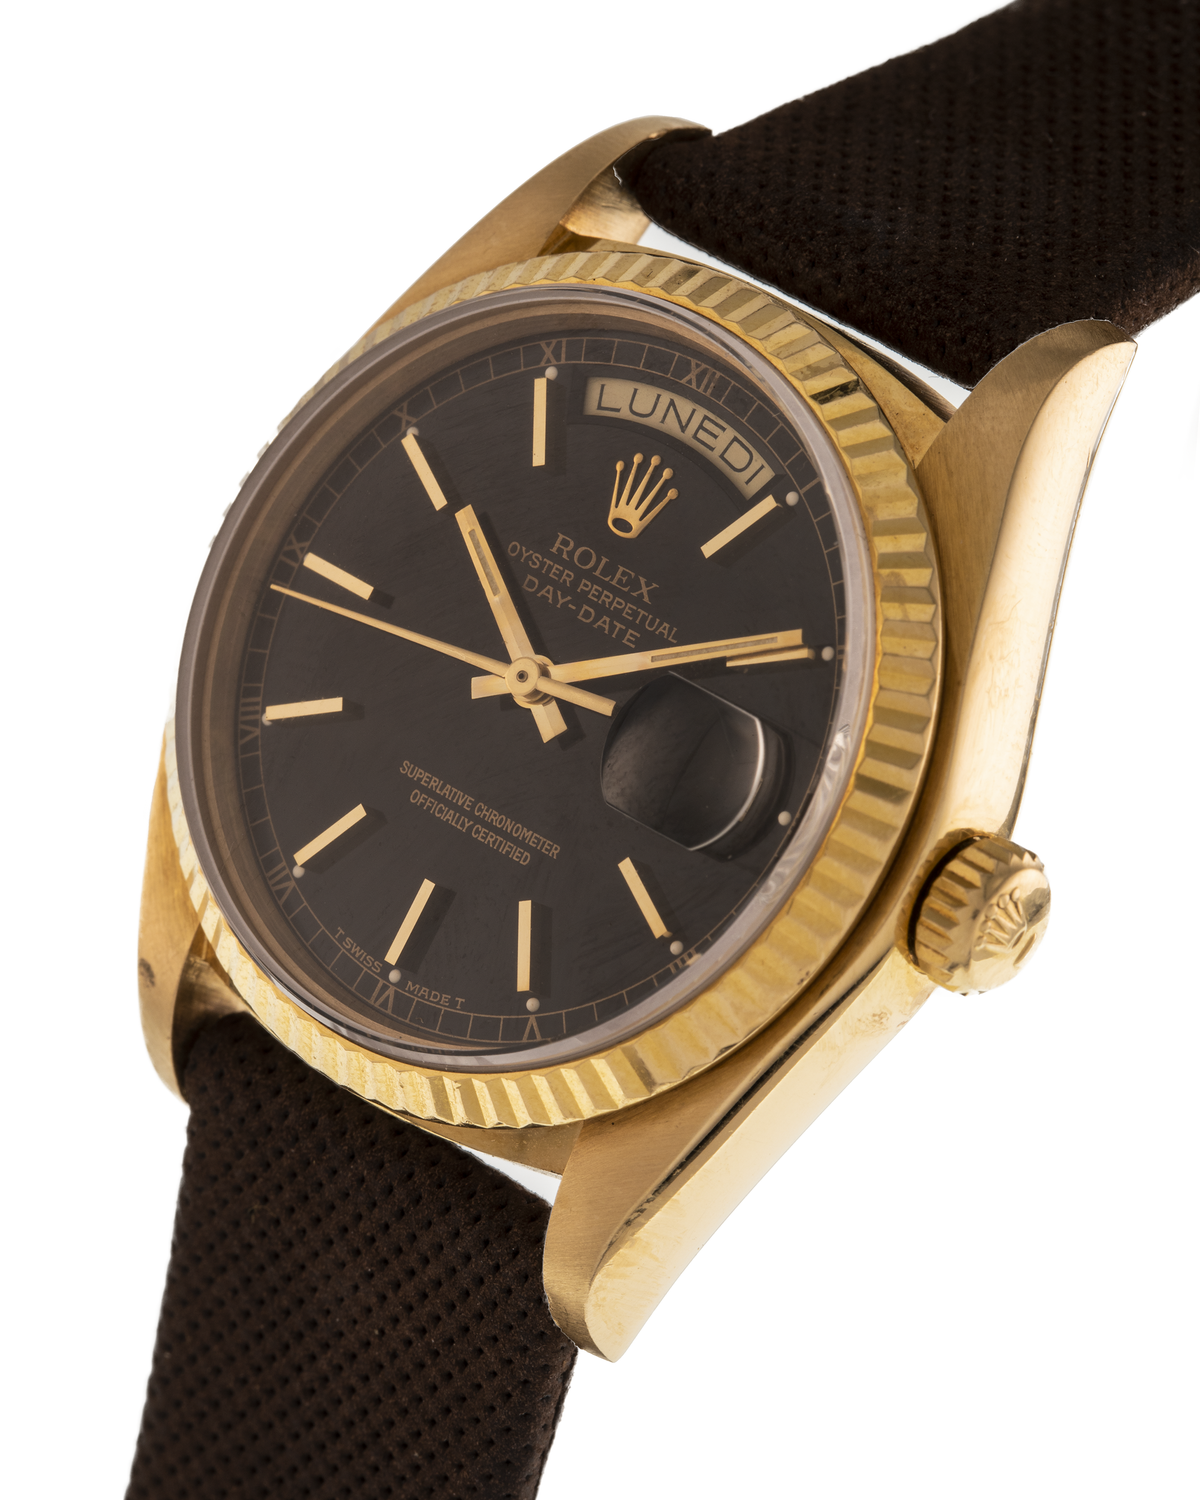 Rolex Oyster Perpetual Day Date black dial Ref. 18038